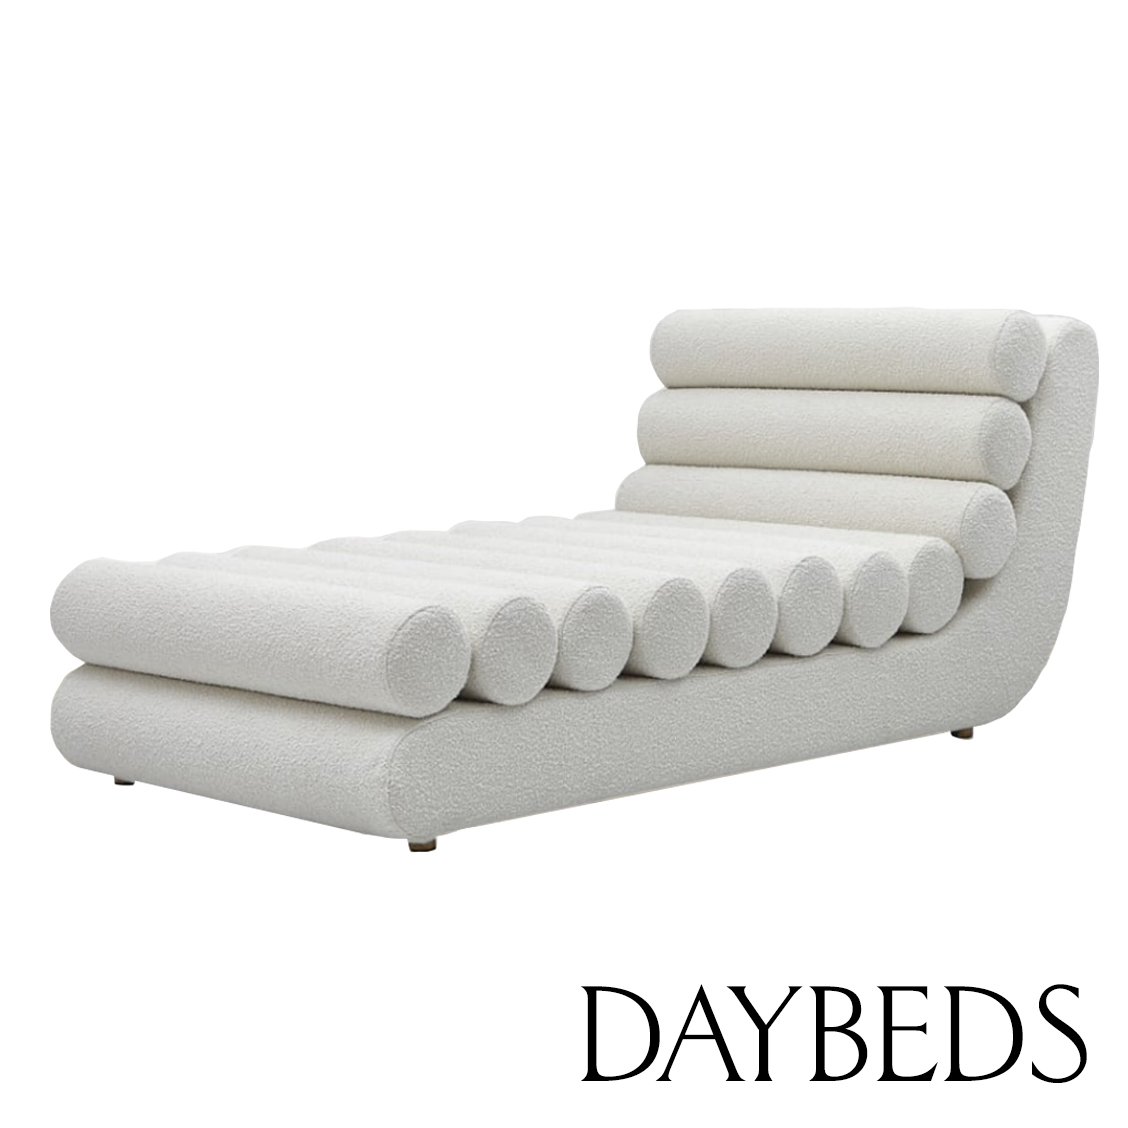 Daybed Title.jpg